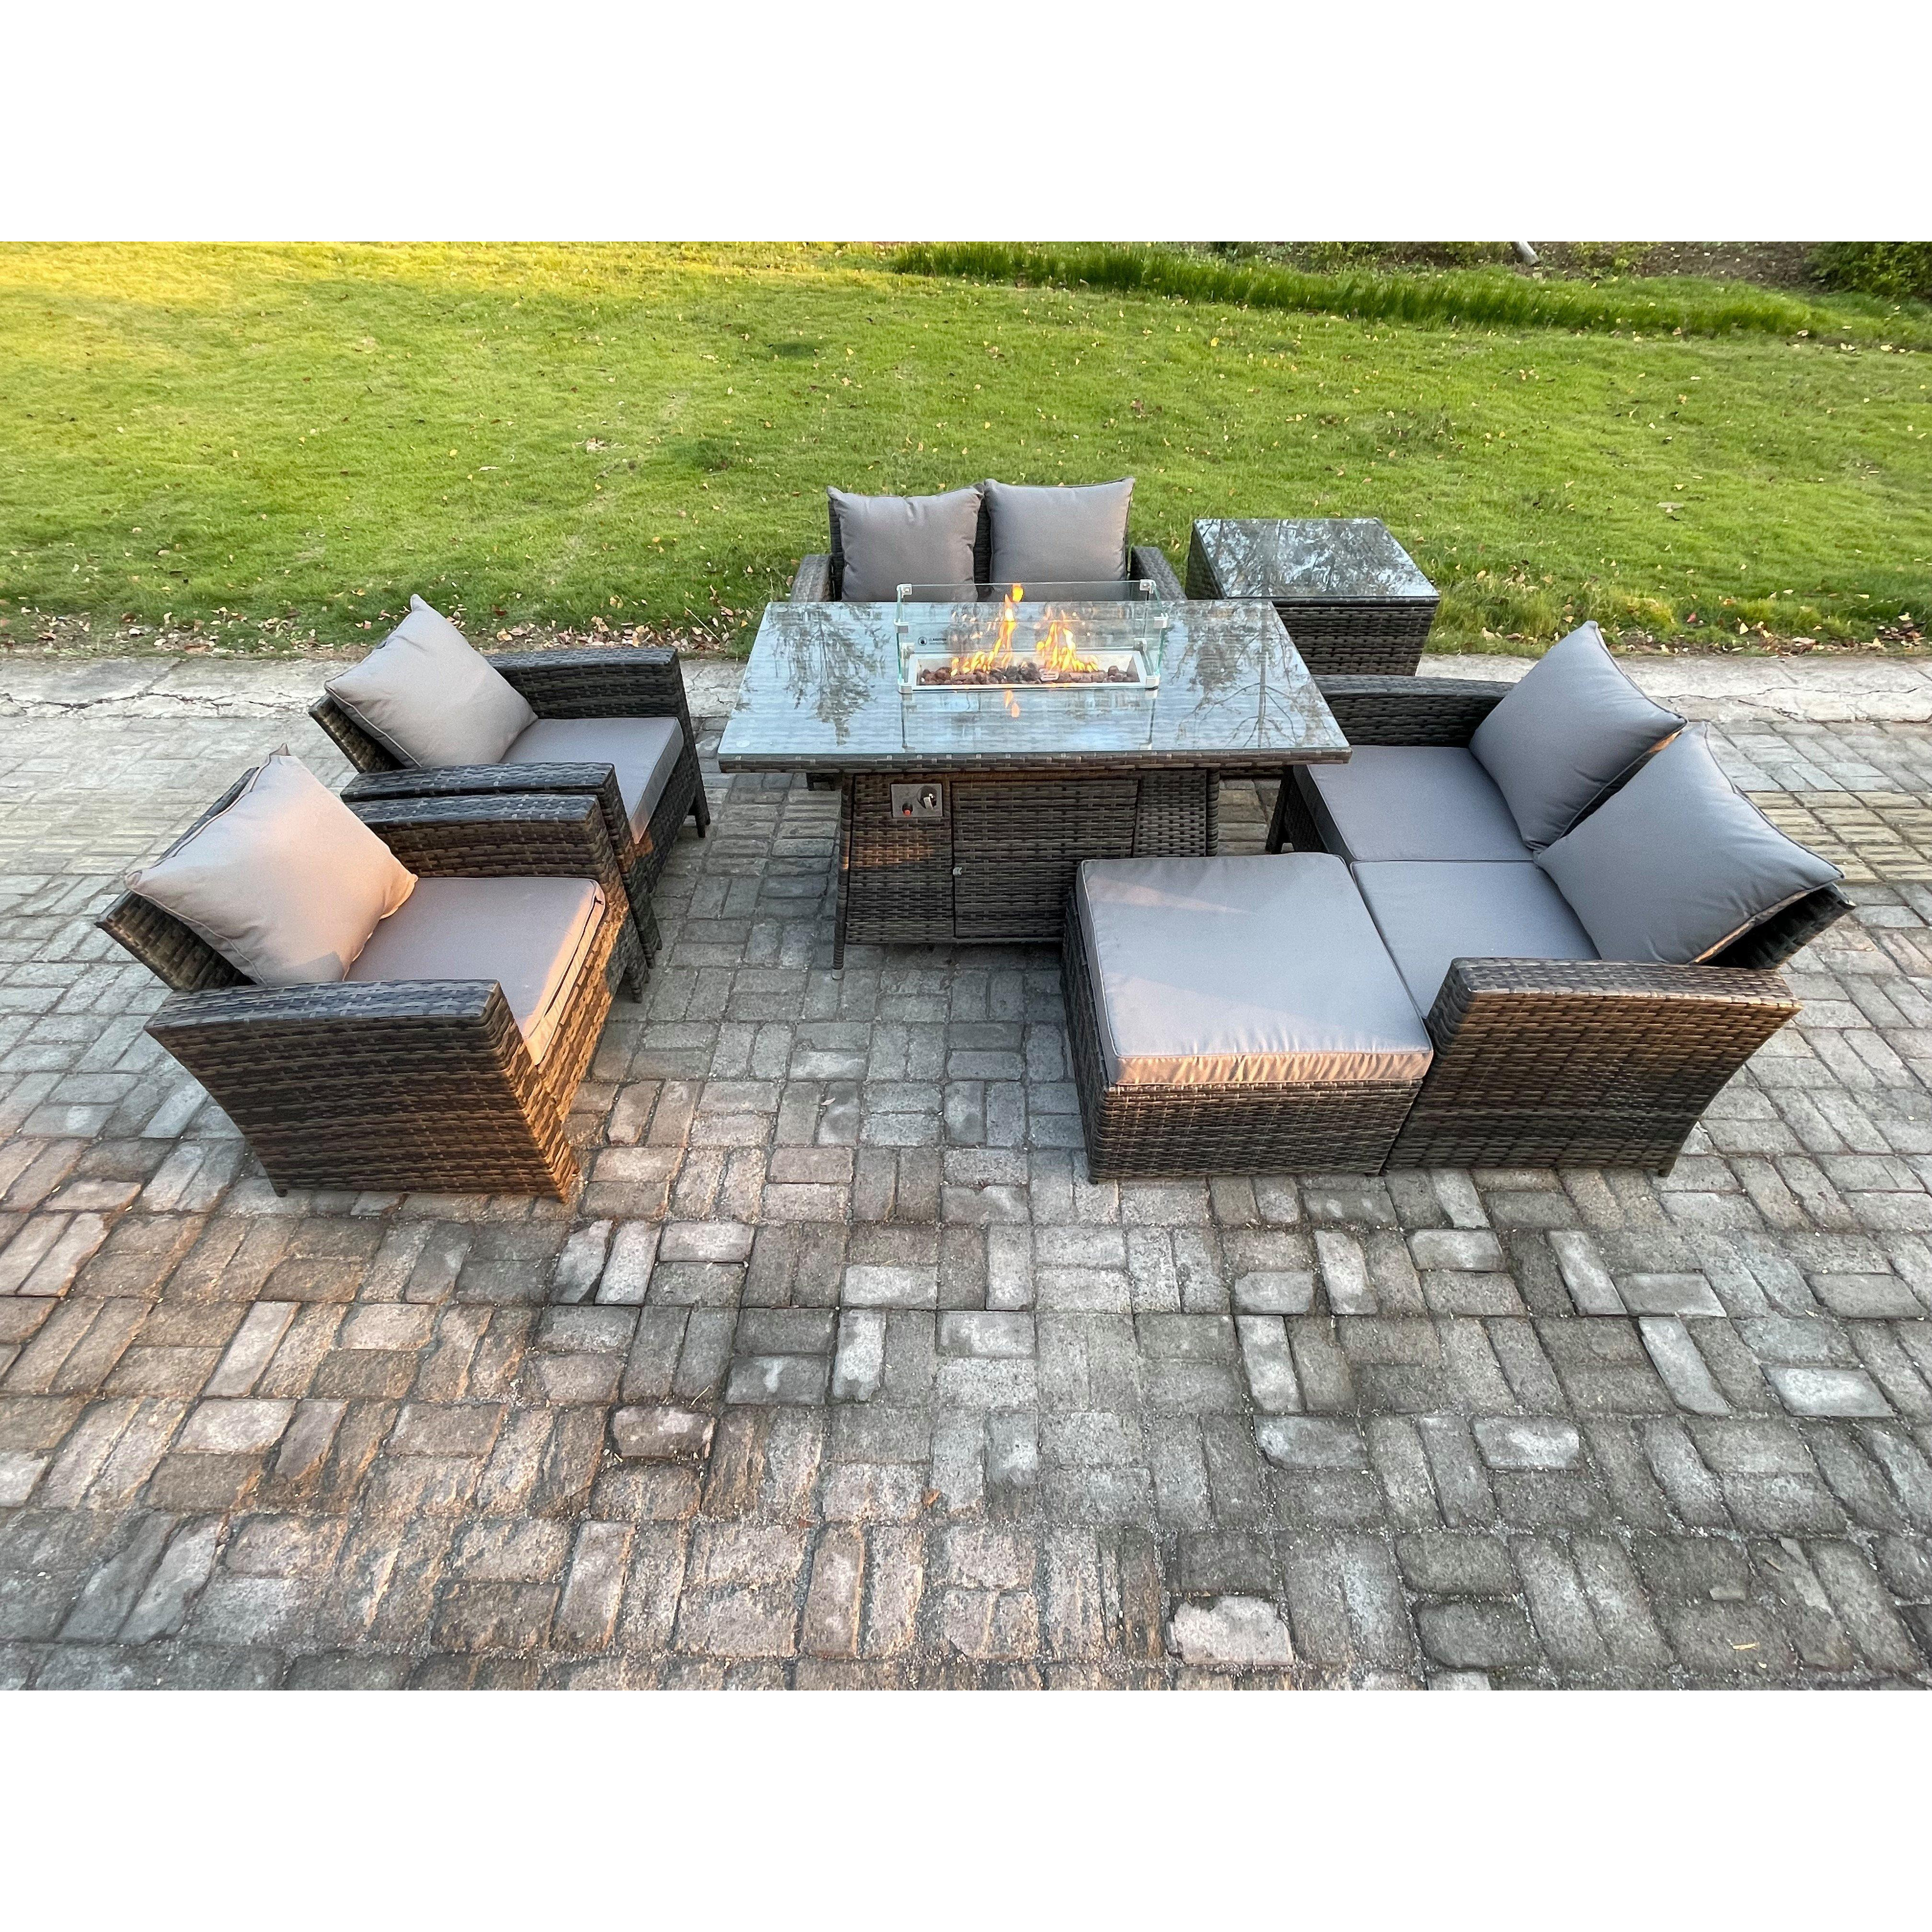 Wicker PE Rattan Garden Furniture Sets 7 Seater Patio Outdoor Gas Firepit Dining Table Heater Set with Double Seat Sofa - image 1